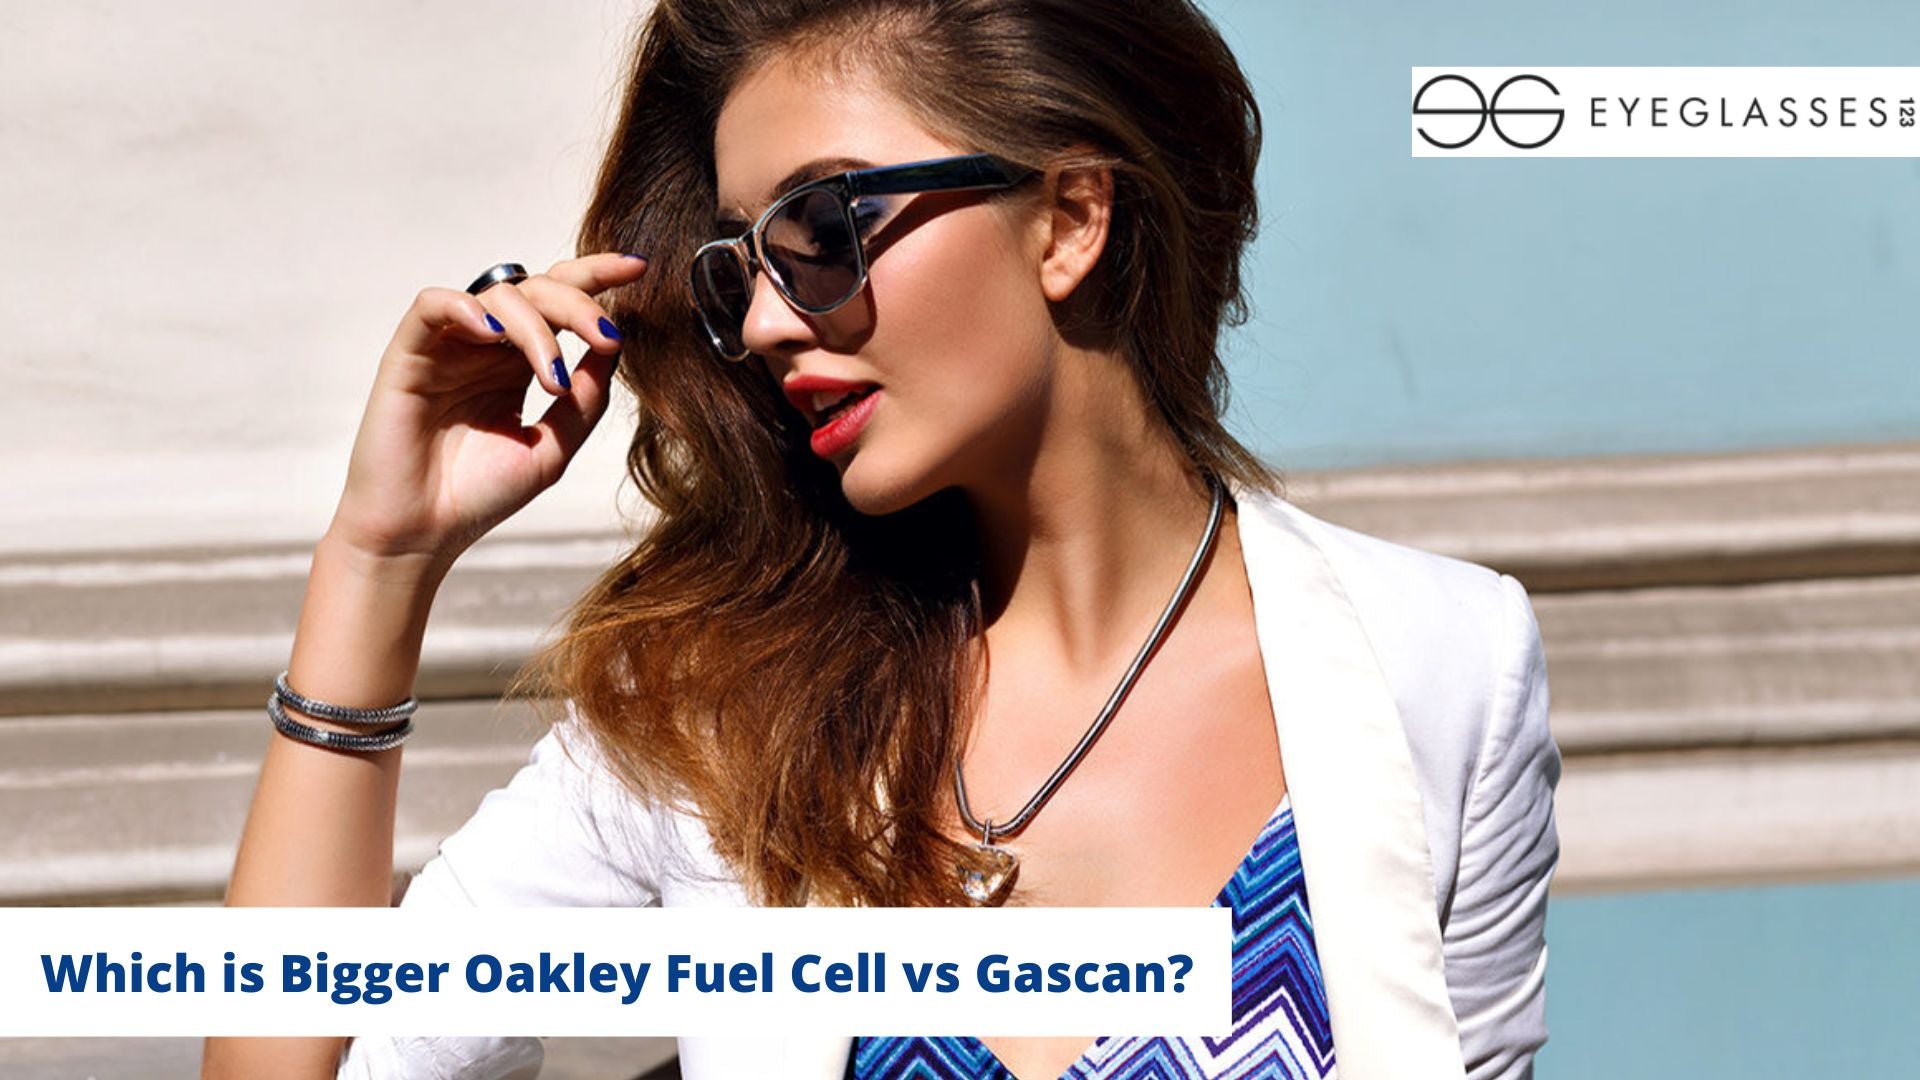 Which is Bigger Oakley Fuel Cell vs Gascan?